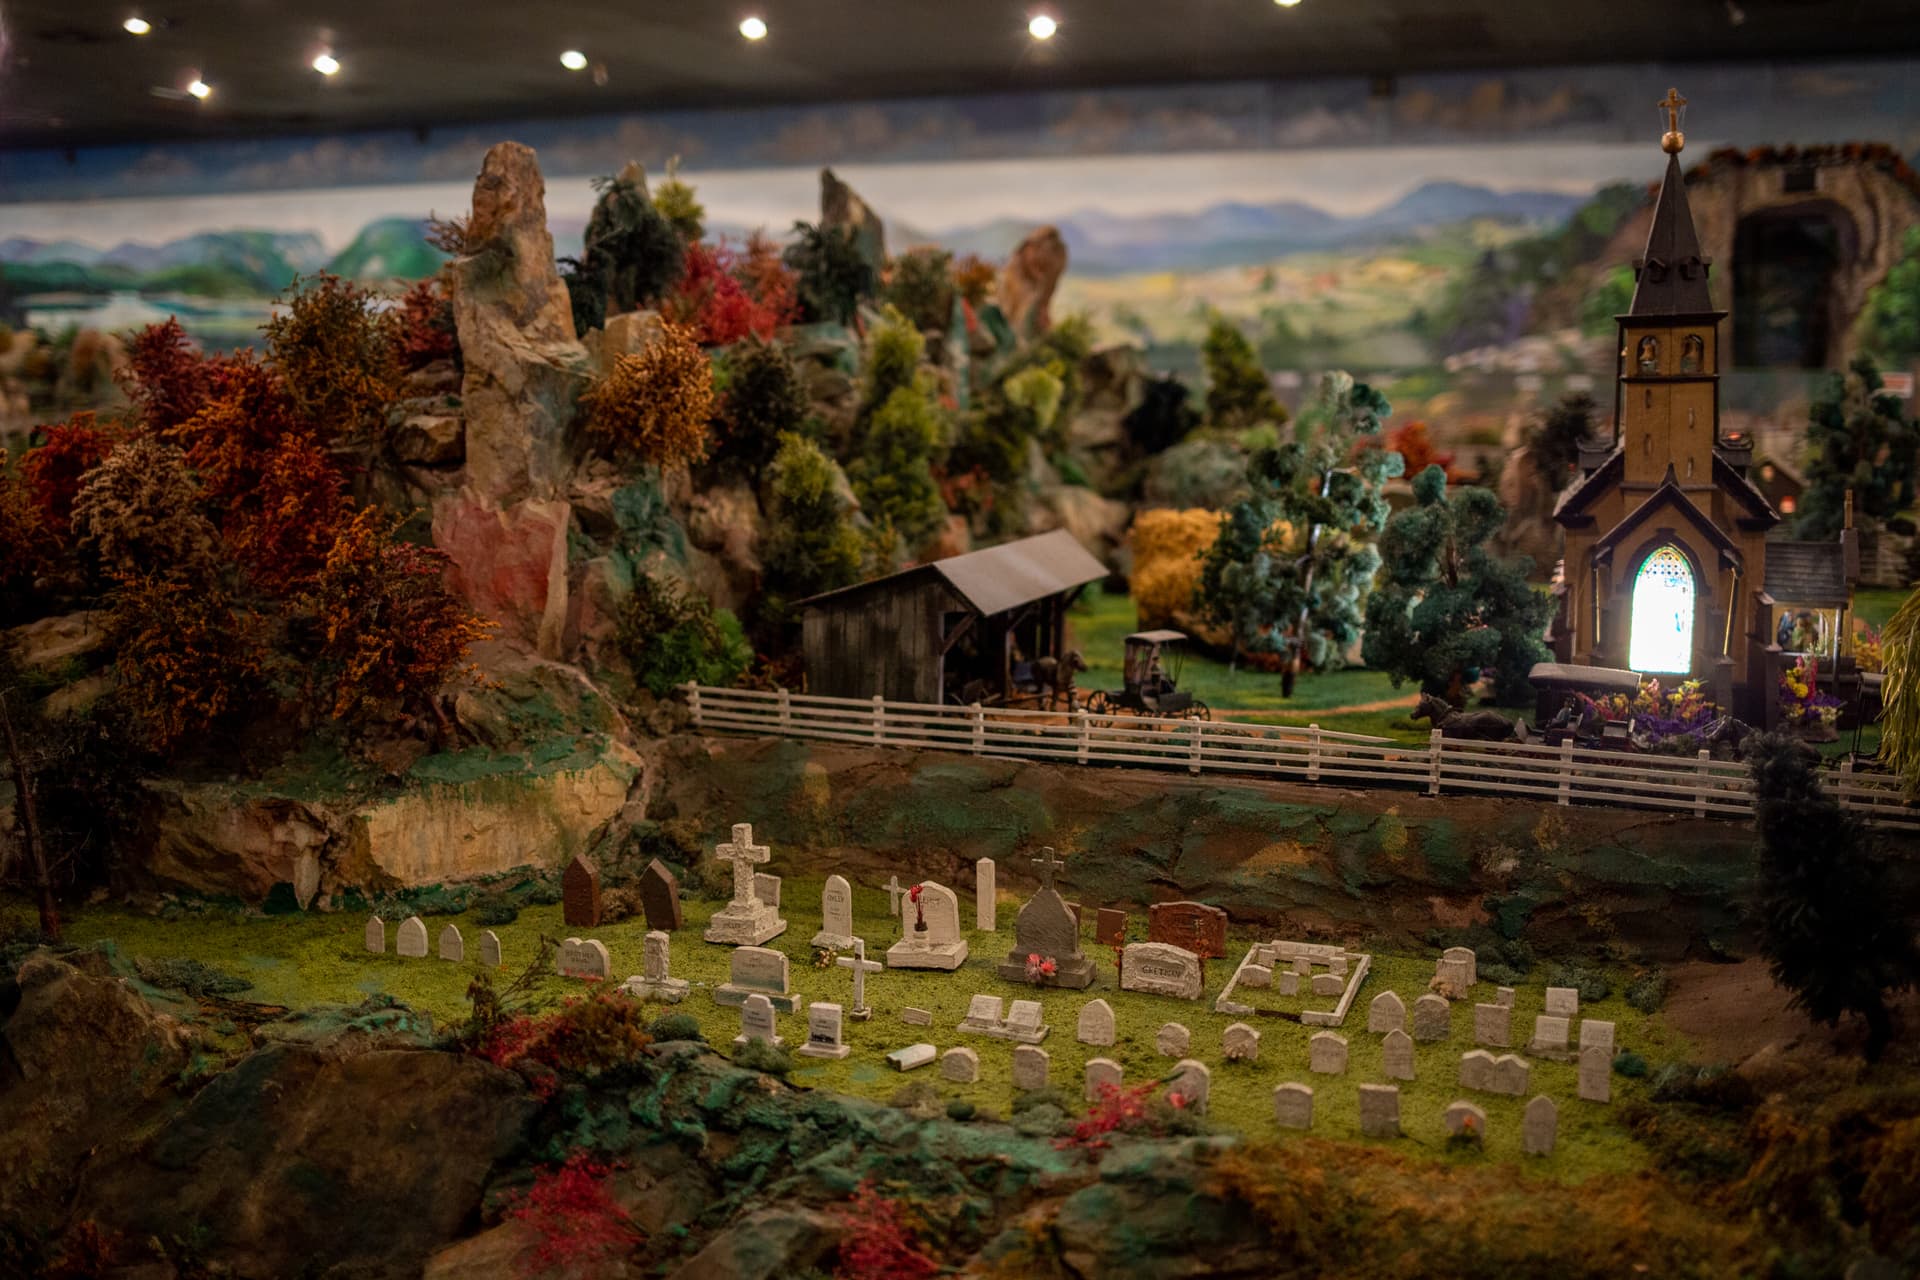  Roadside America’s idealized miniature version of the U.S. is for sale—but there are conditions 